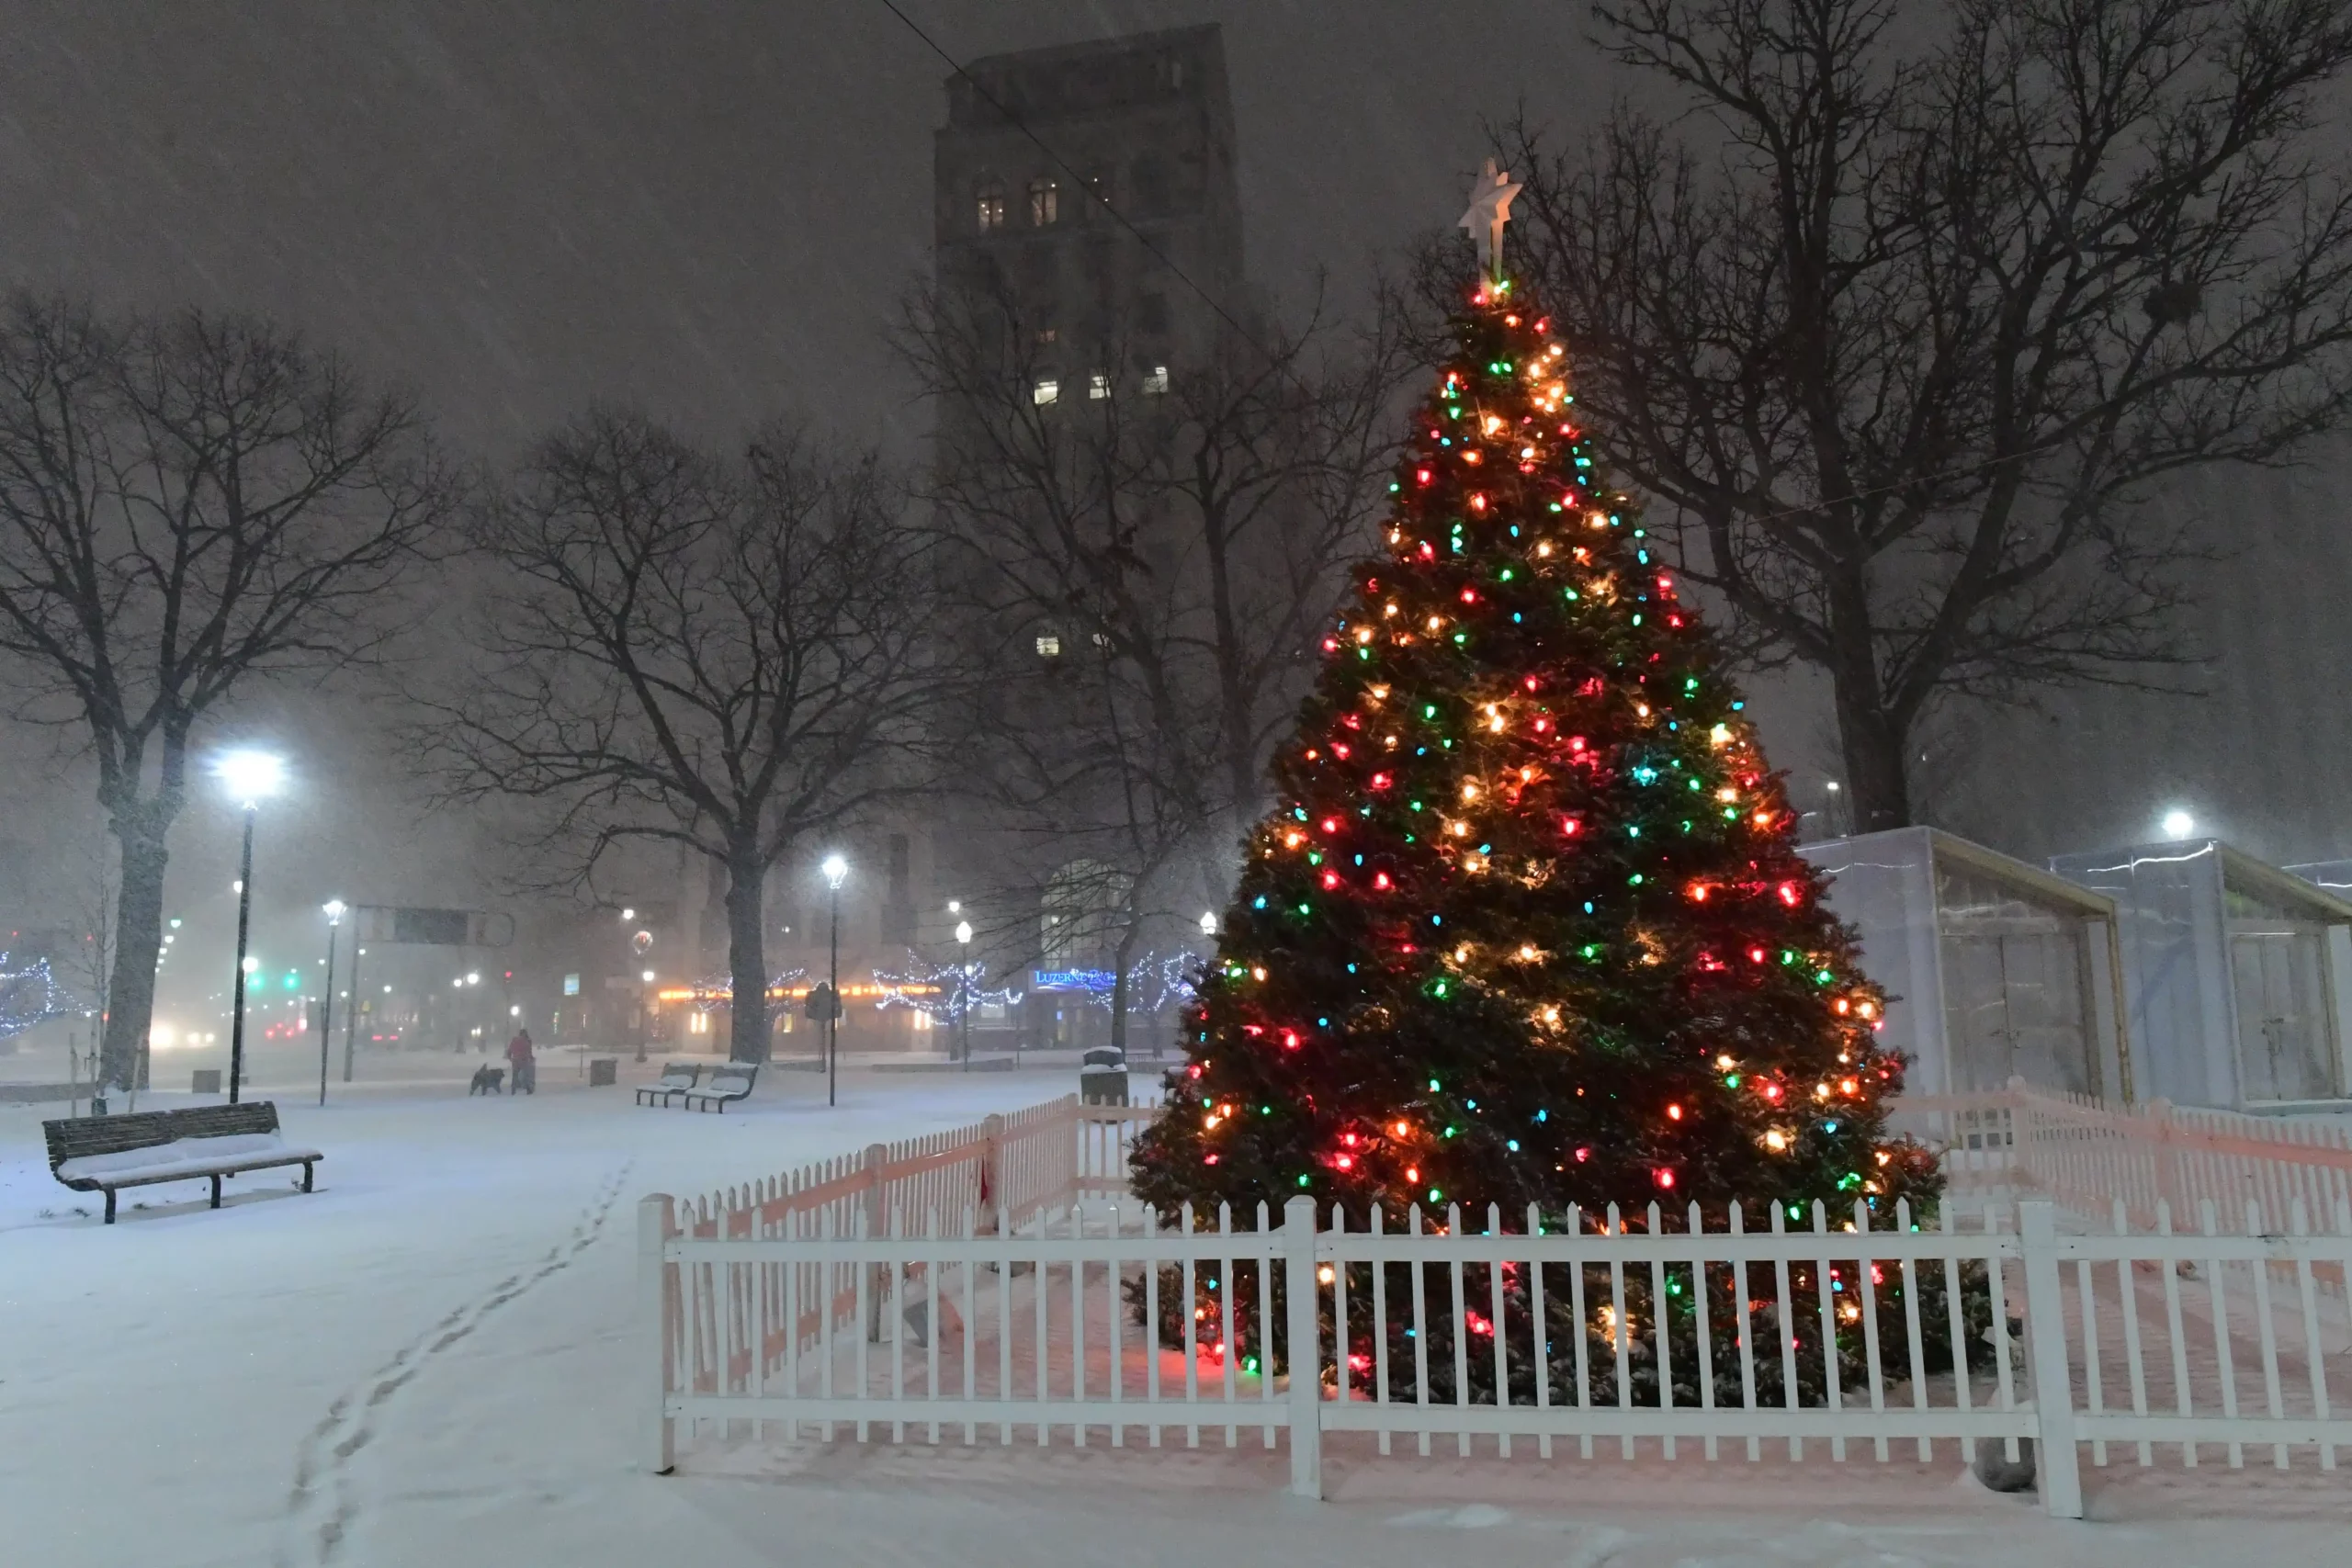 Most Americans won't have any snow for Christmas this year.